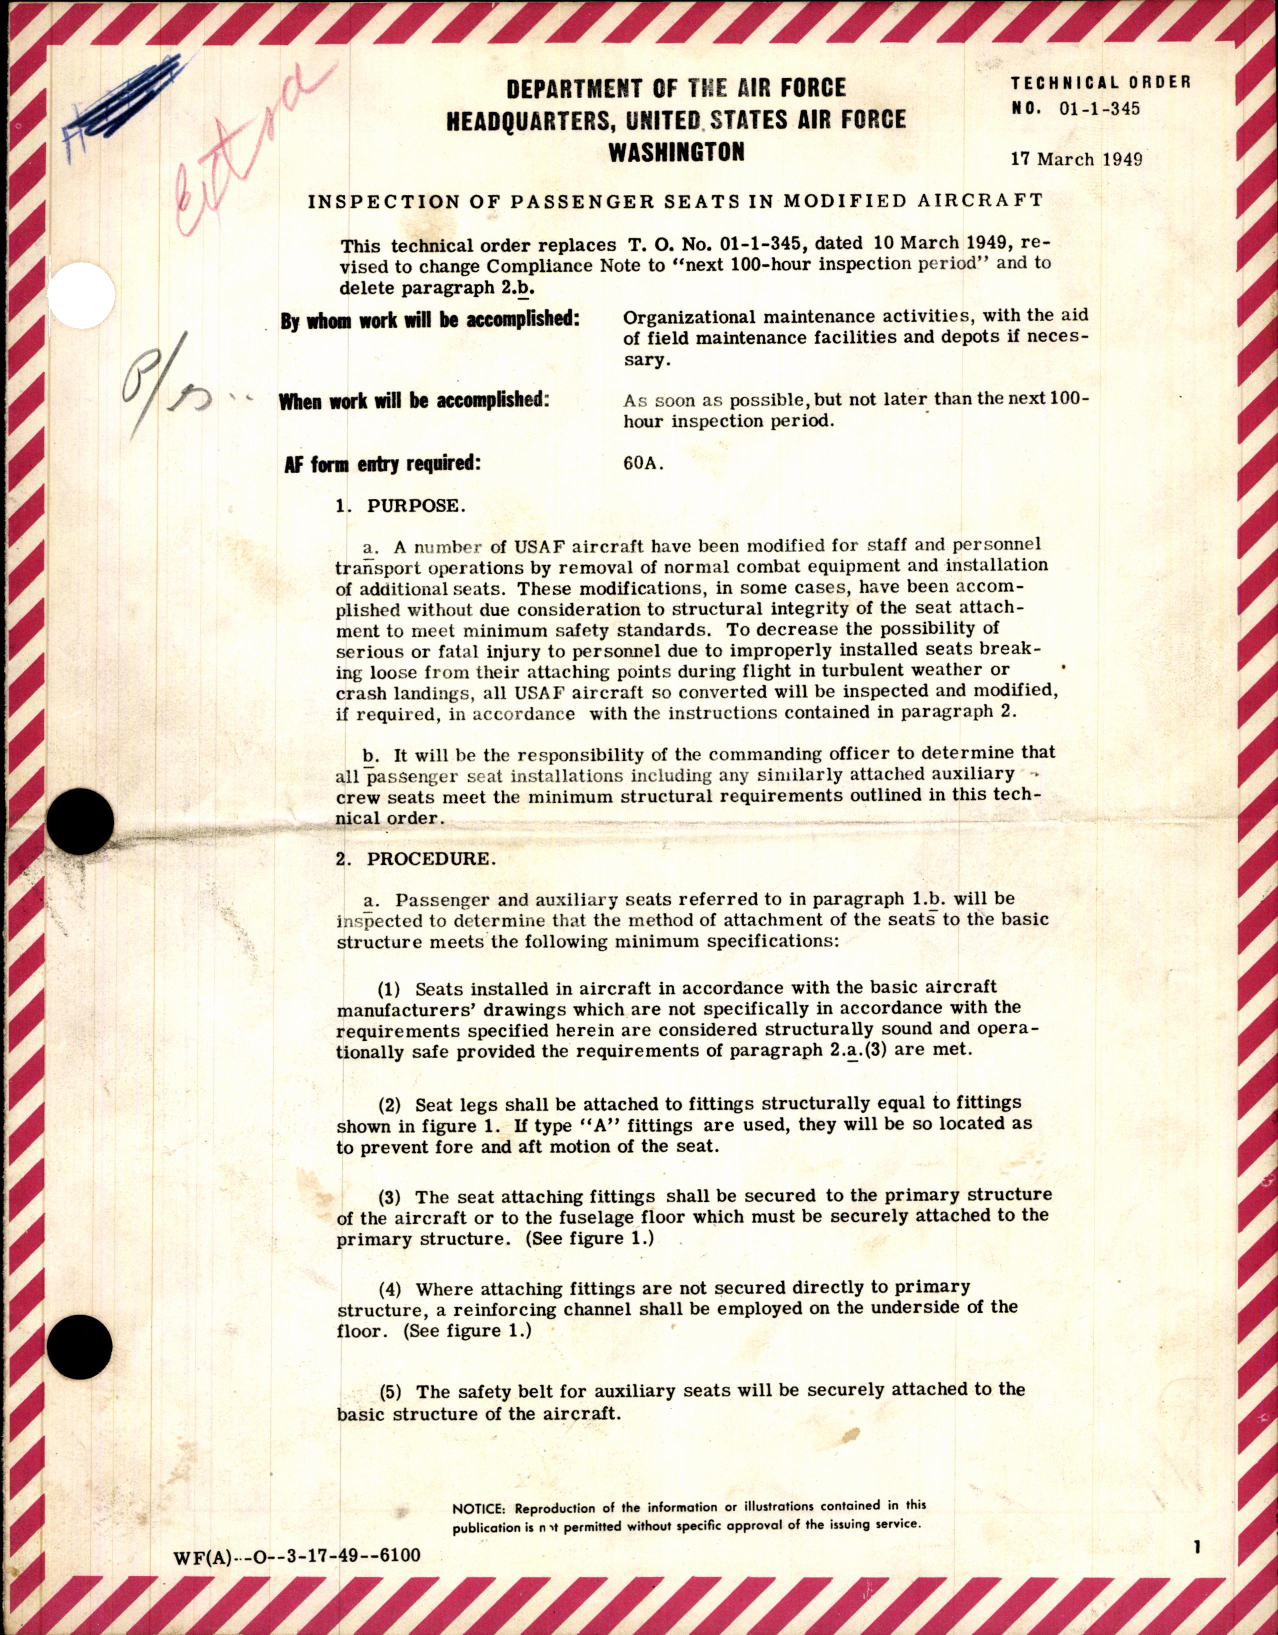 Sample page 1 from AirCorps Library document: Inspection of Passenger Seats in Modified Aircraft